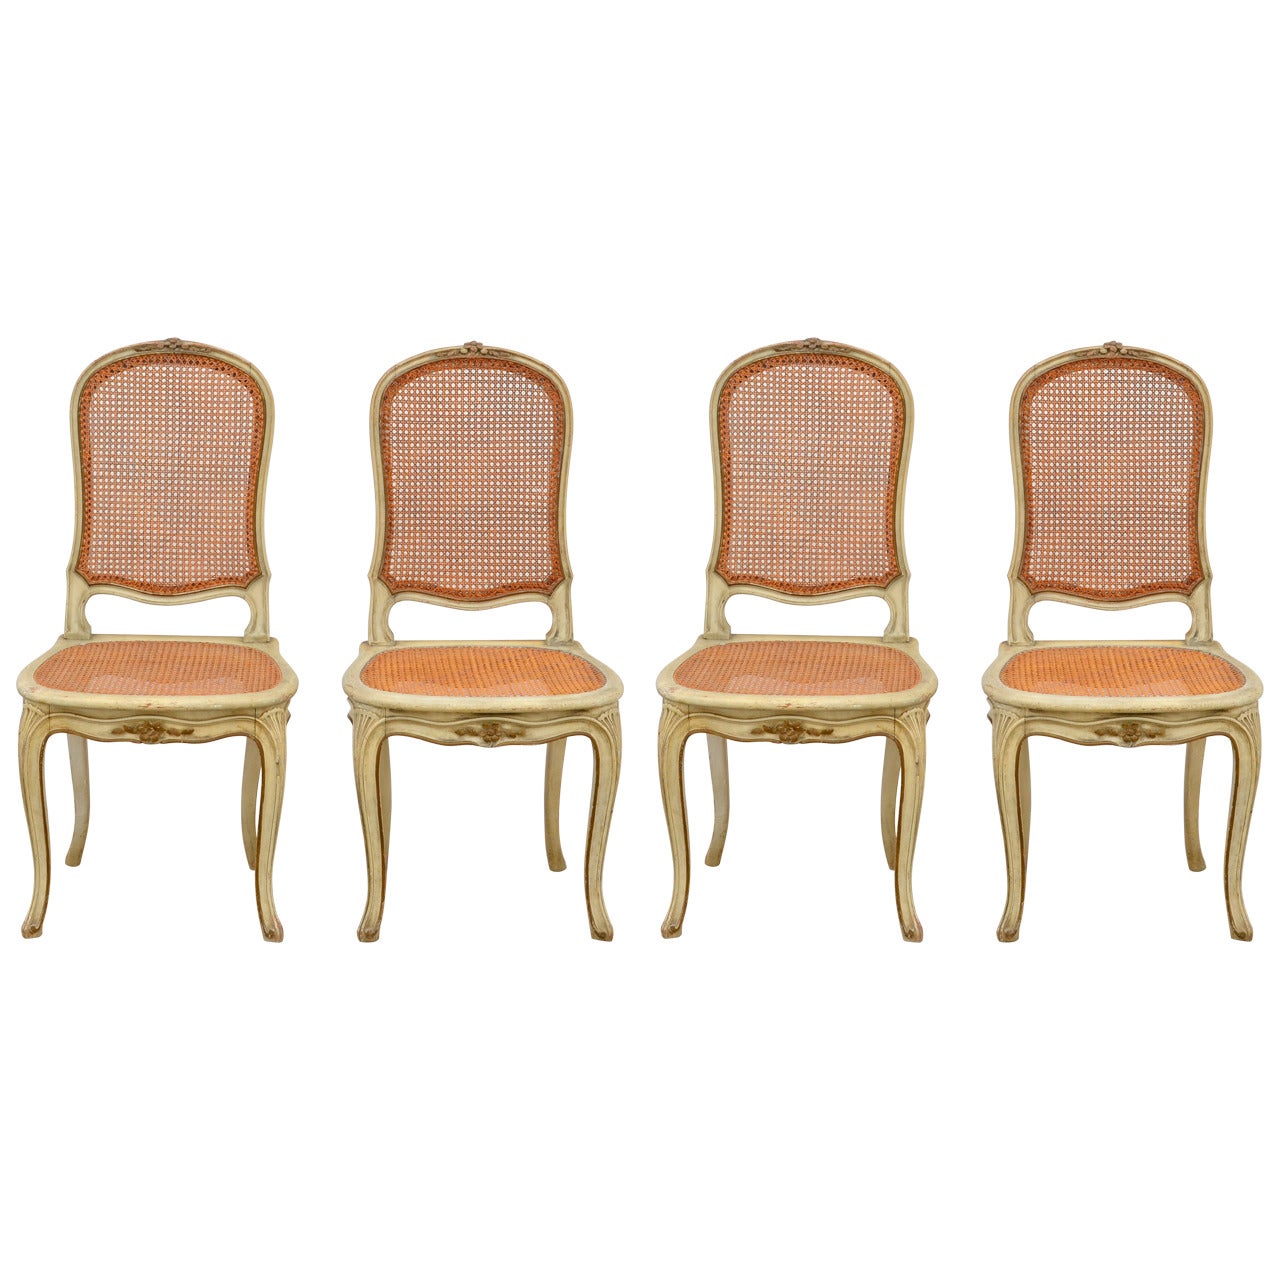 Set of Four Louis XV Style Caned Chairs